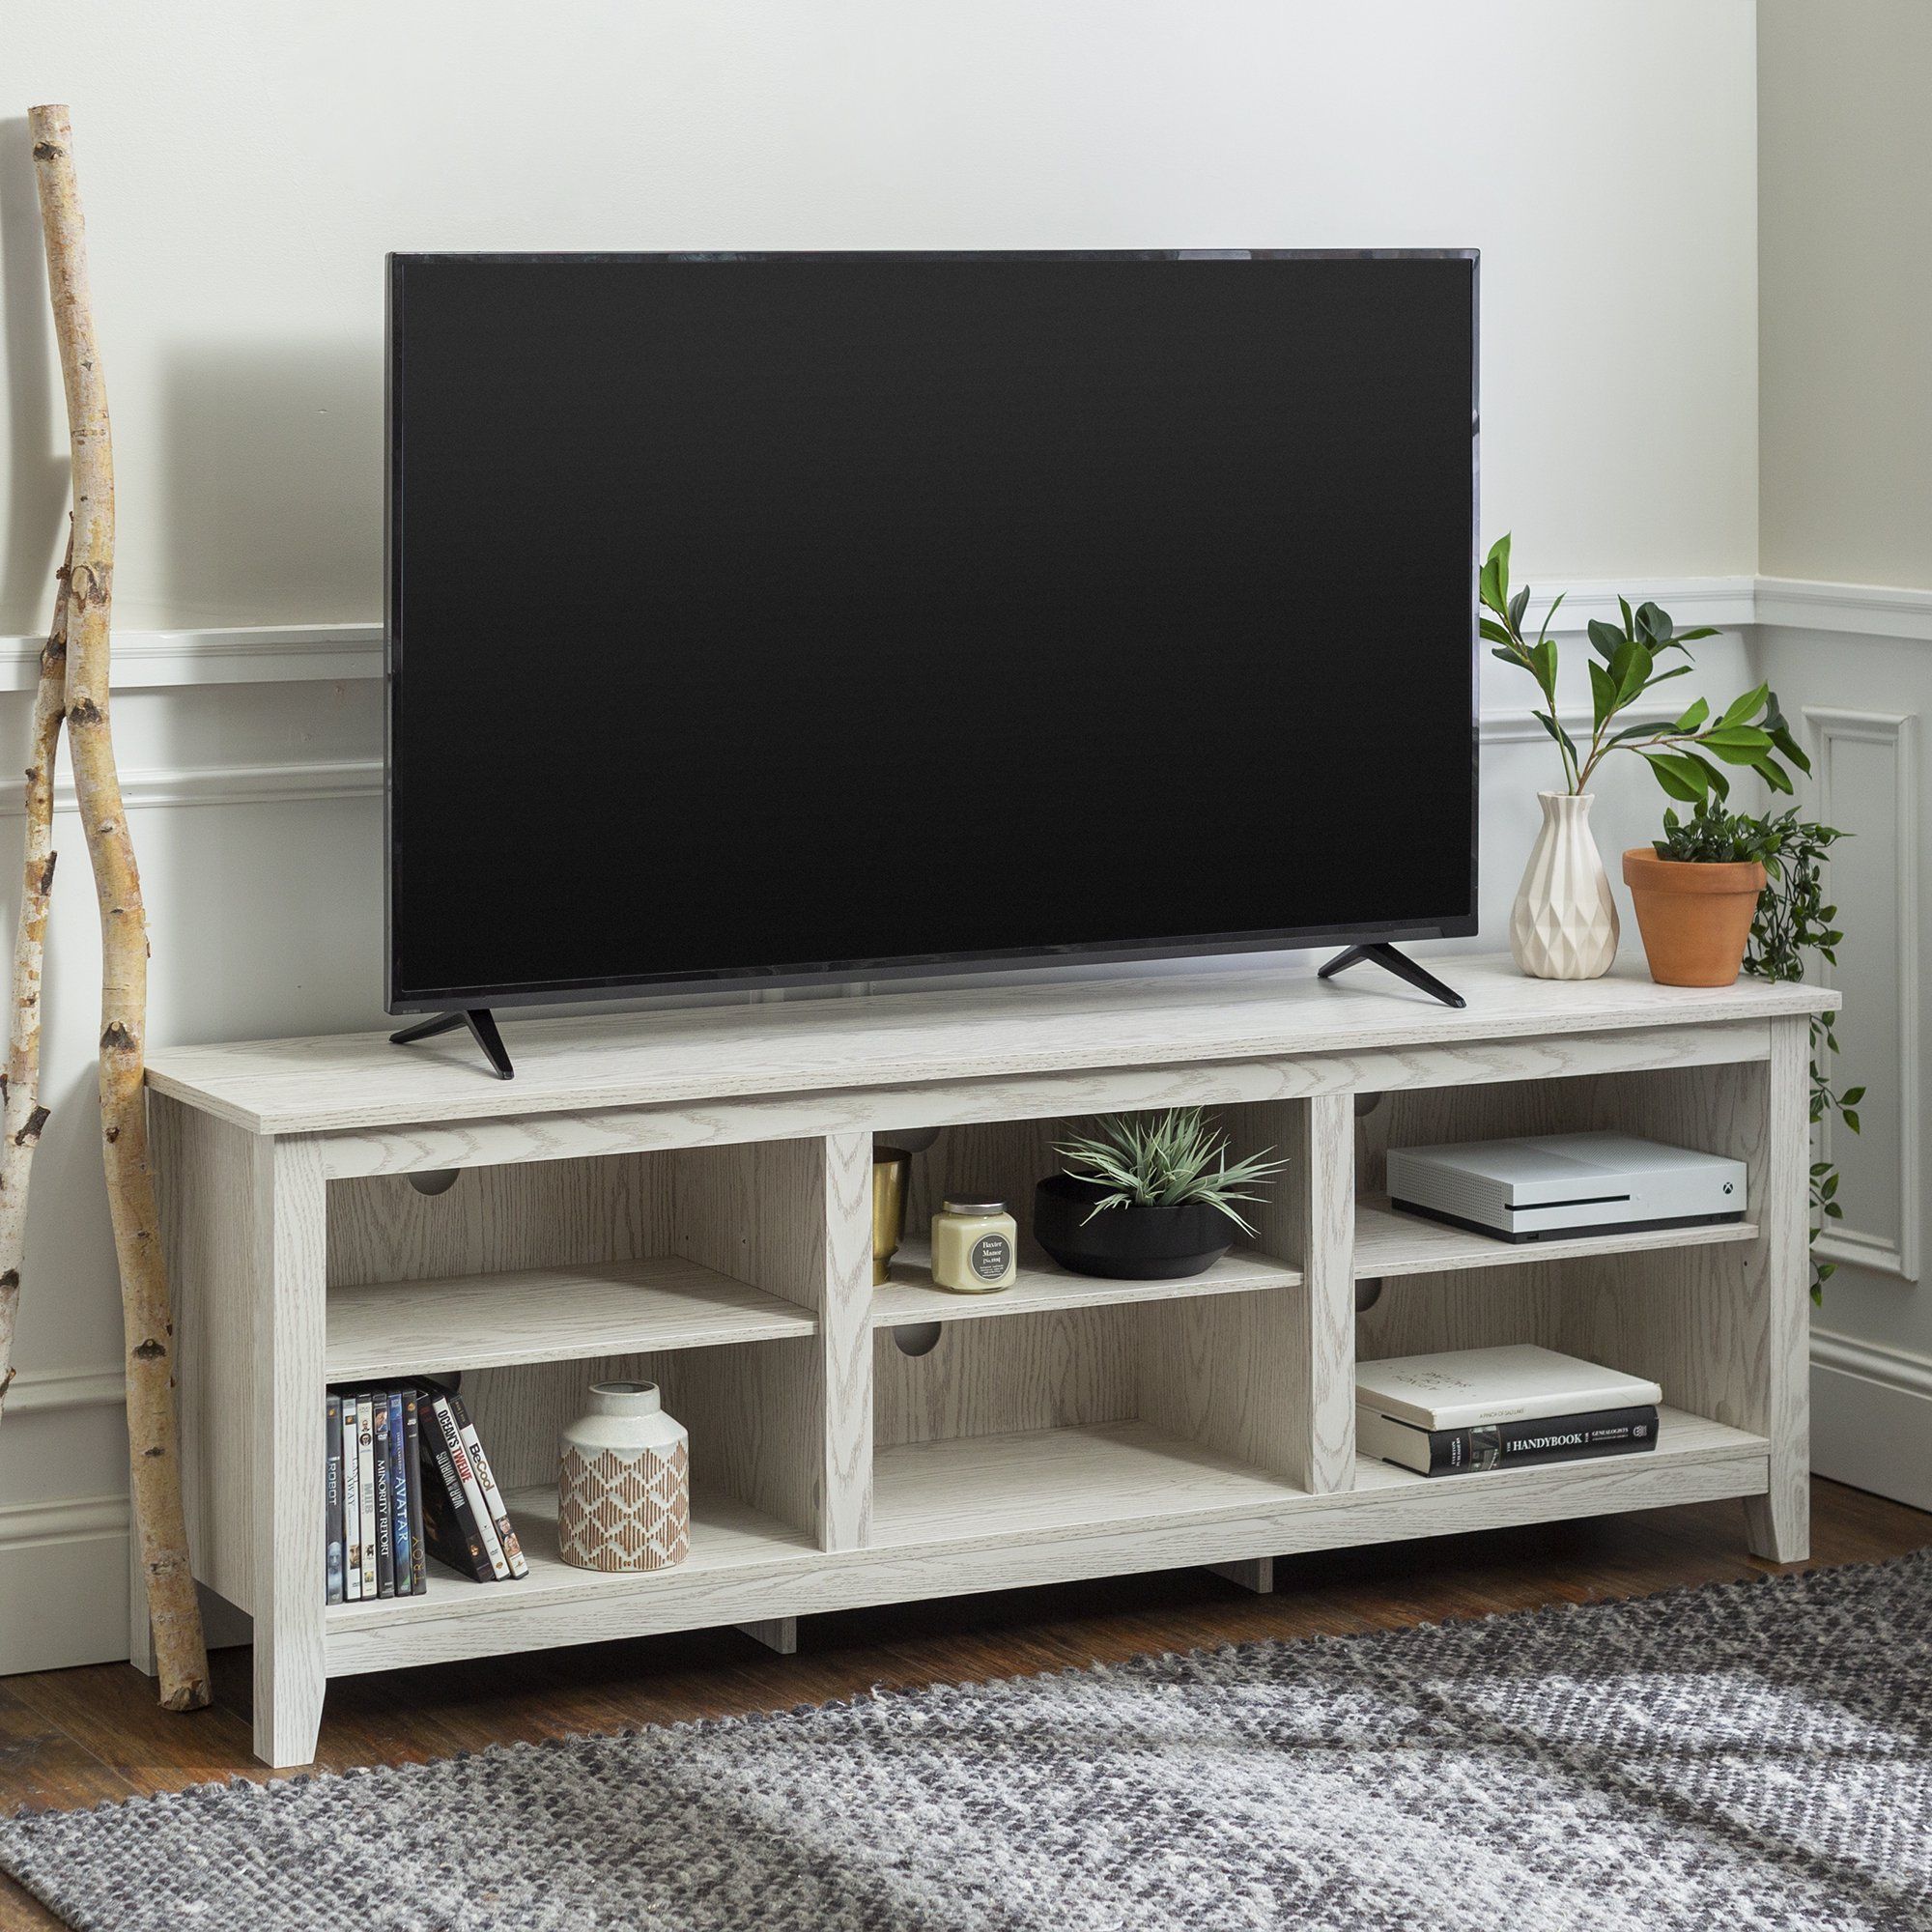 Manor Park Wood Tv Media Storage Stand For Tvs Up To 78 Throughout Woven Paths Open Storage Tv Stands With Multiple Finishes (View 5 of 15)